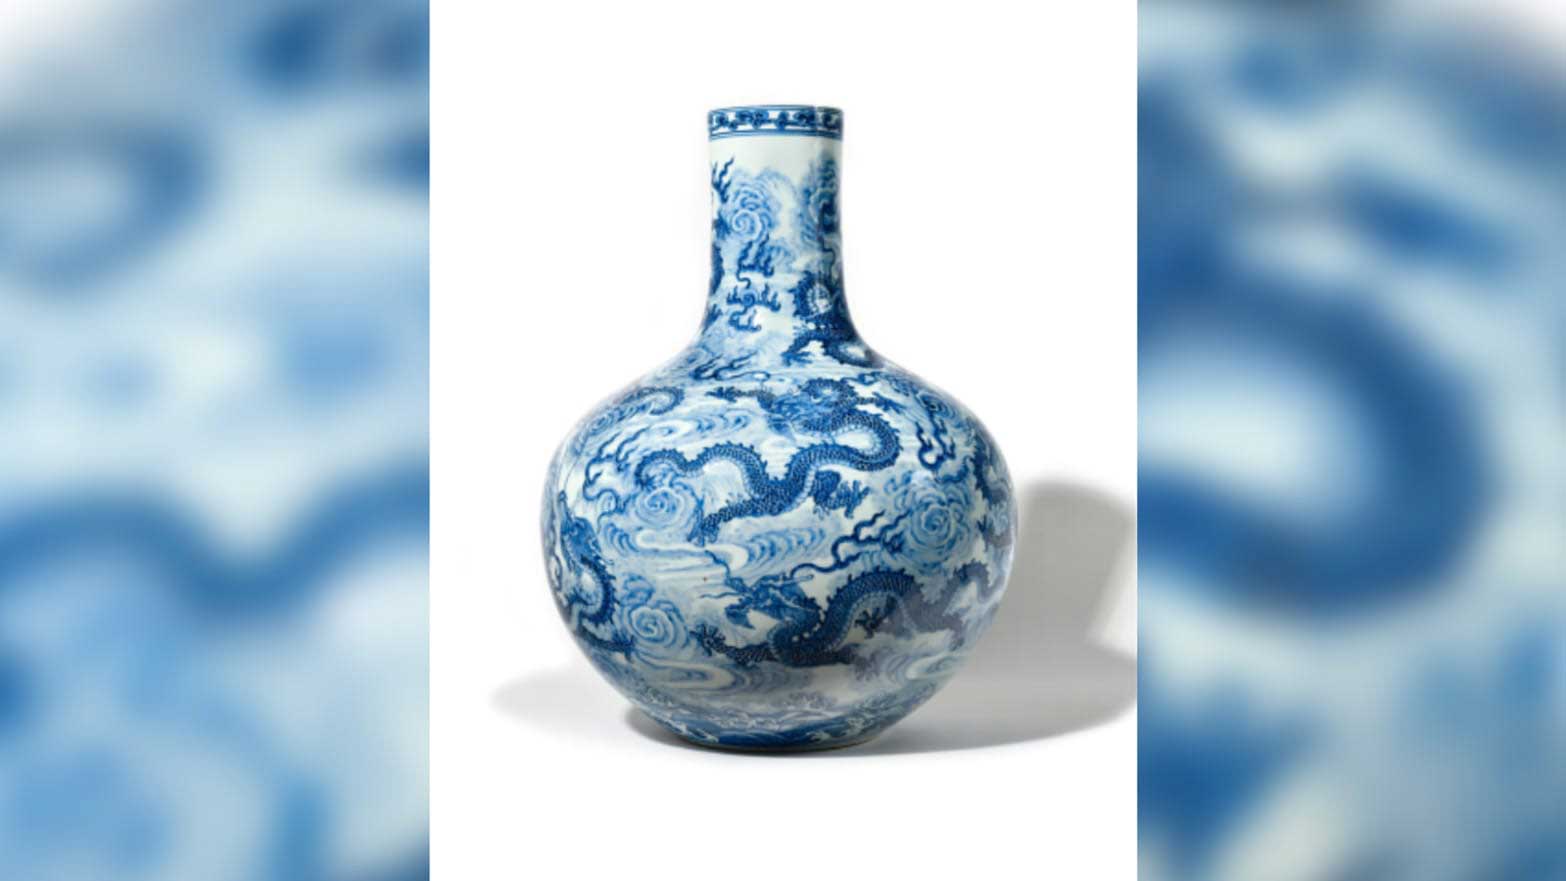 Chinese Vase Sells for Incredible 9 Million euros